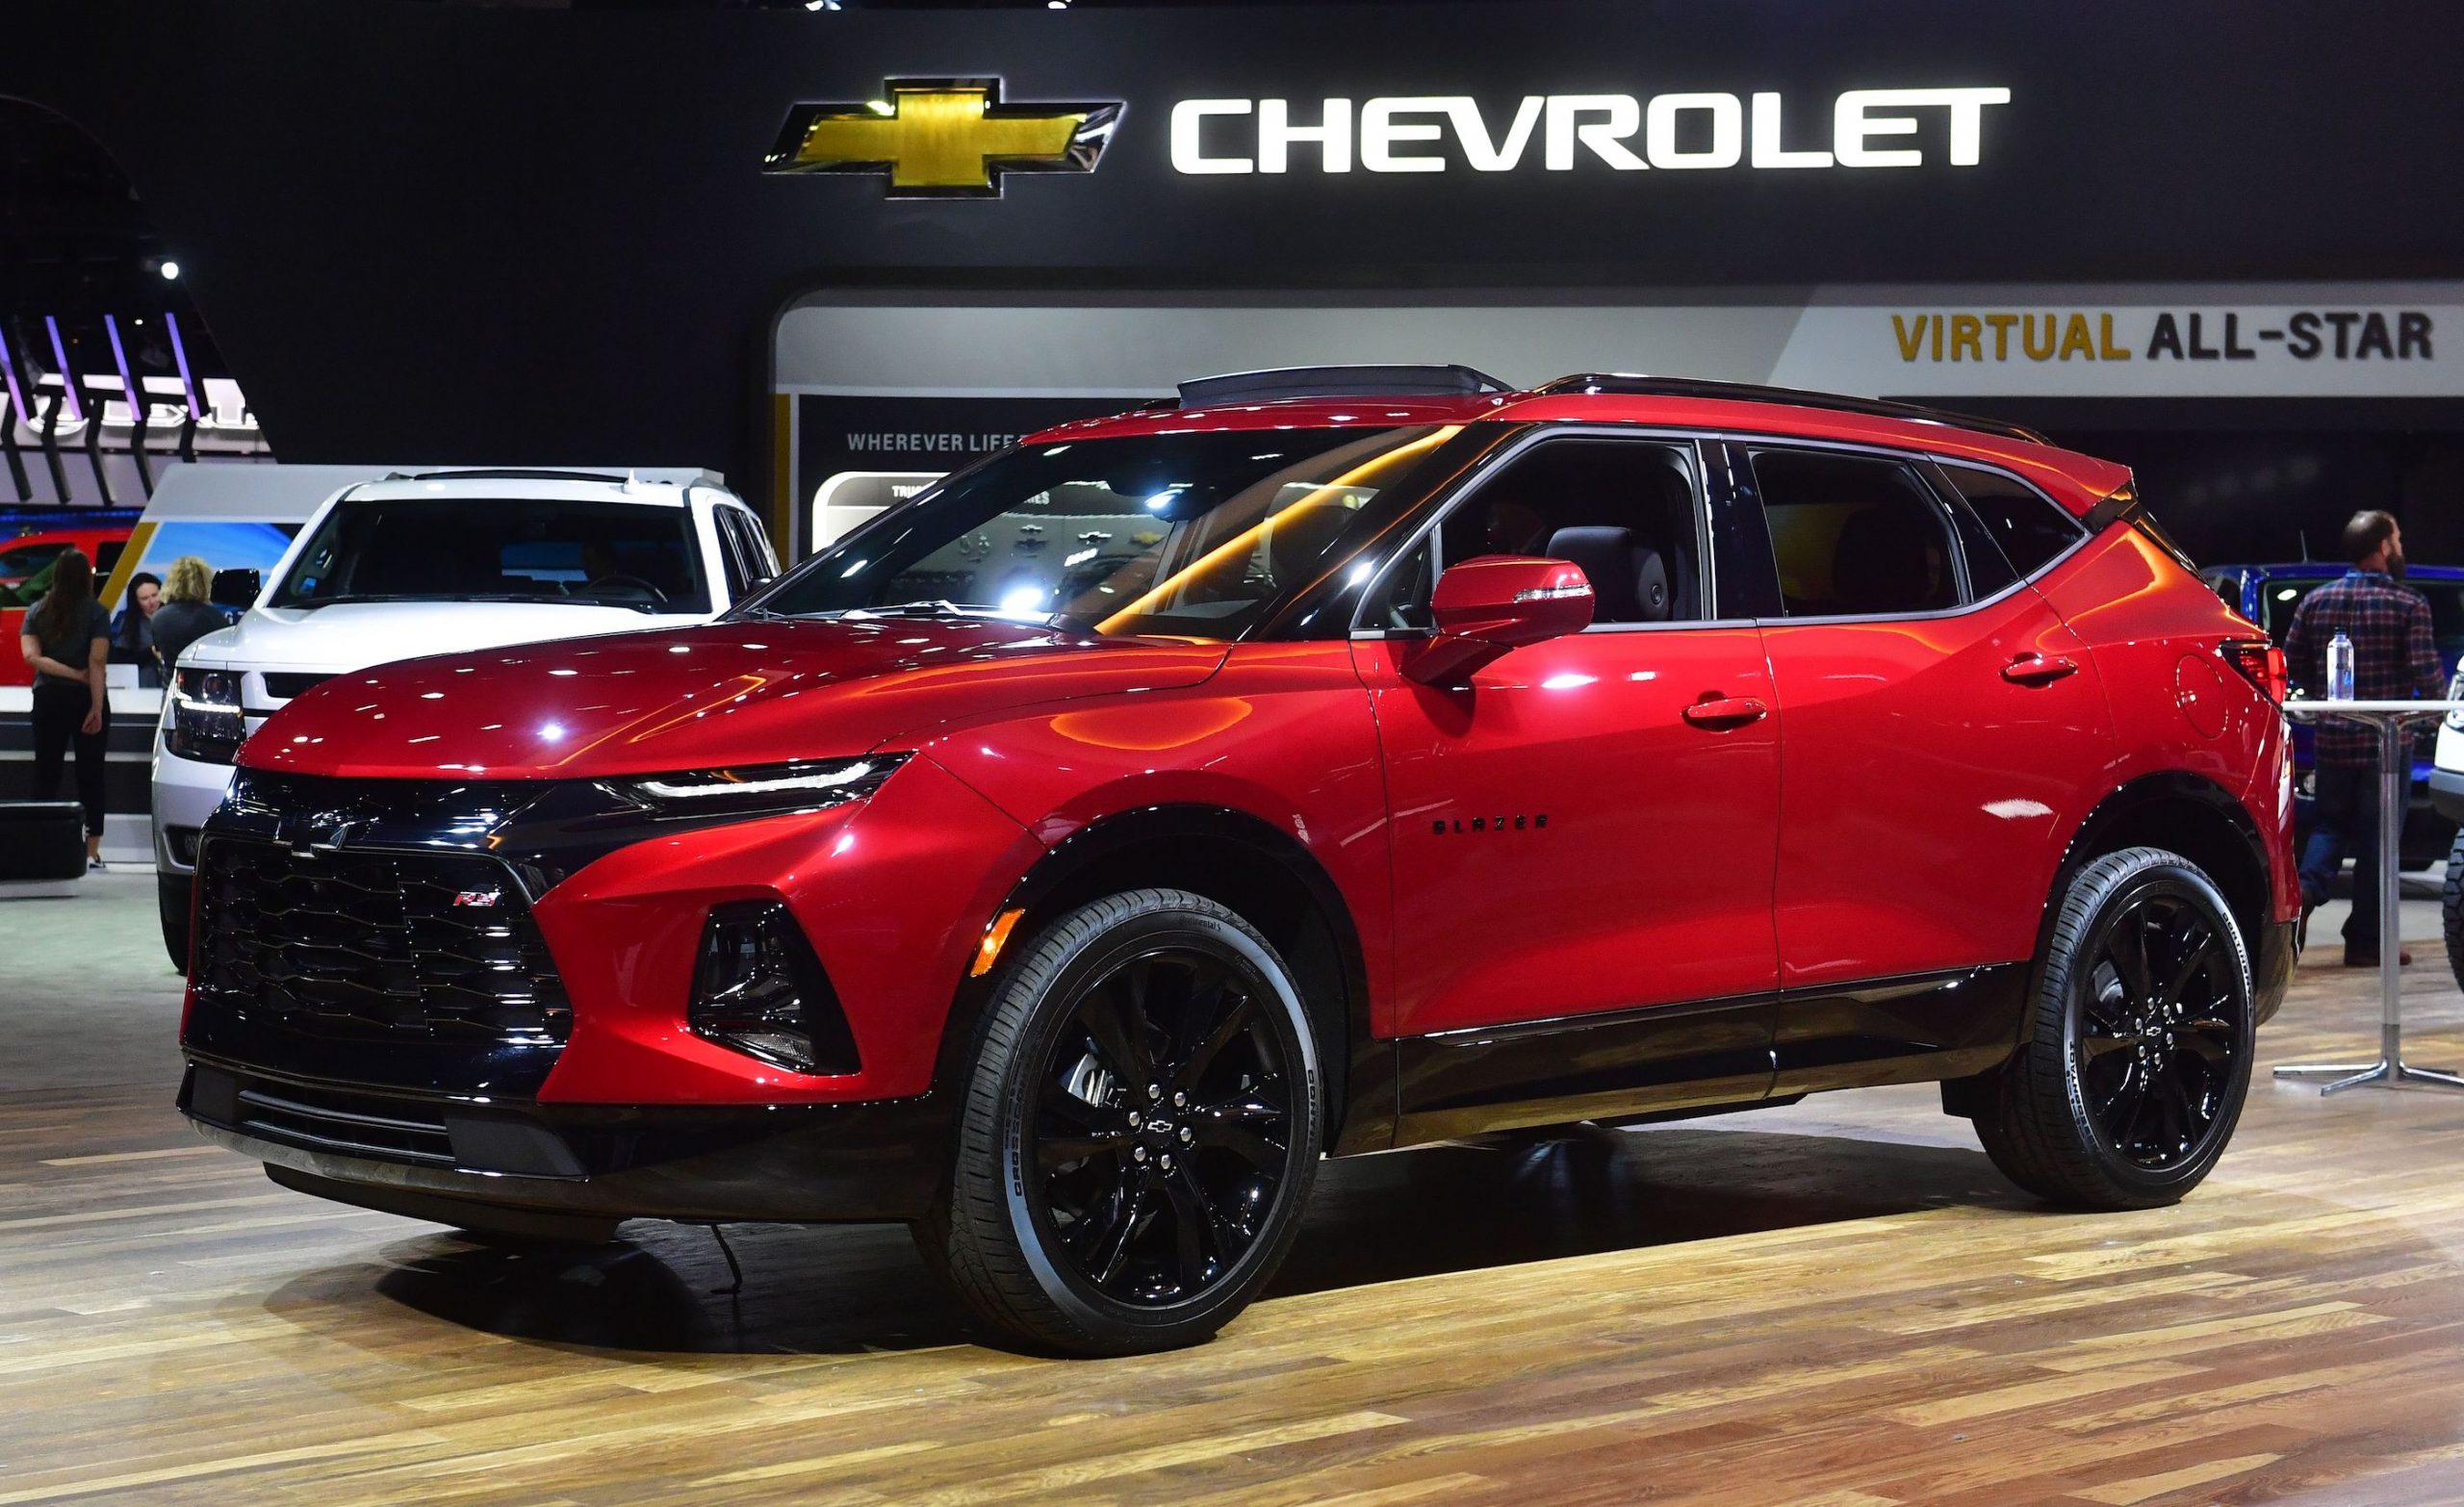 The all-new Blazer SUV from Chevrolet on display at the 2019 Los Angeles Auto Show in Los Angeles, California